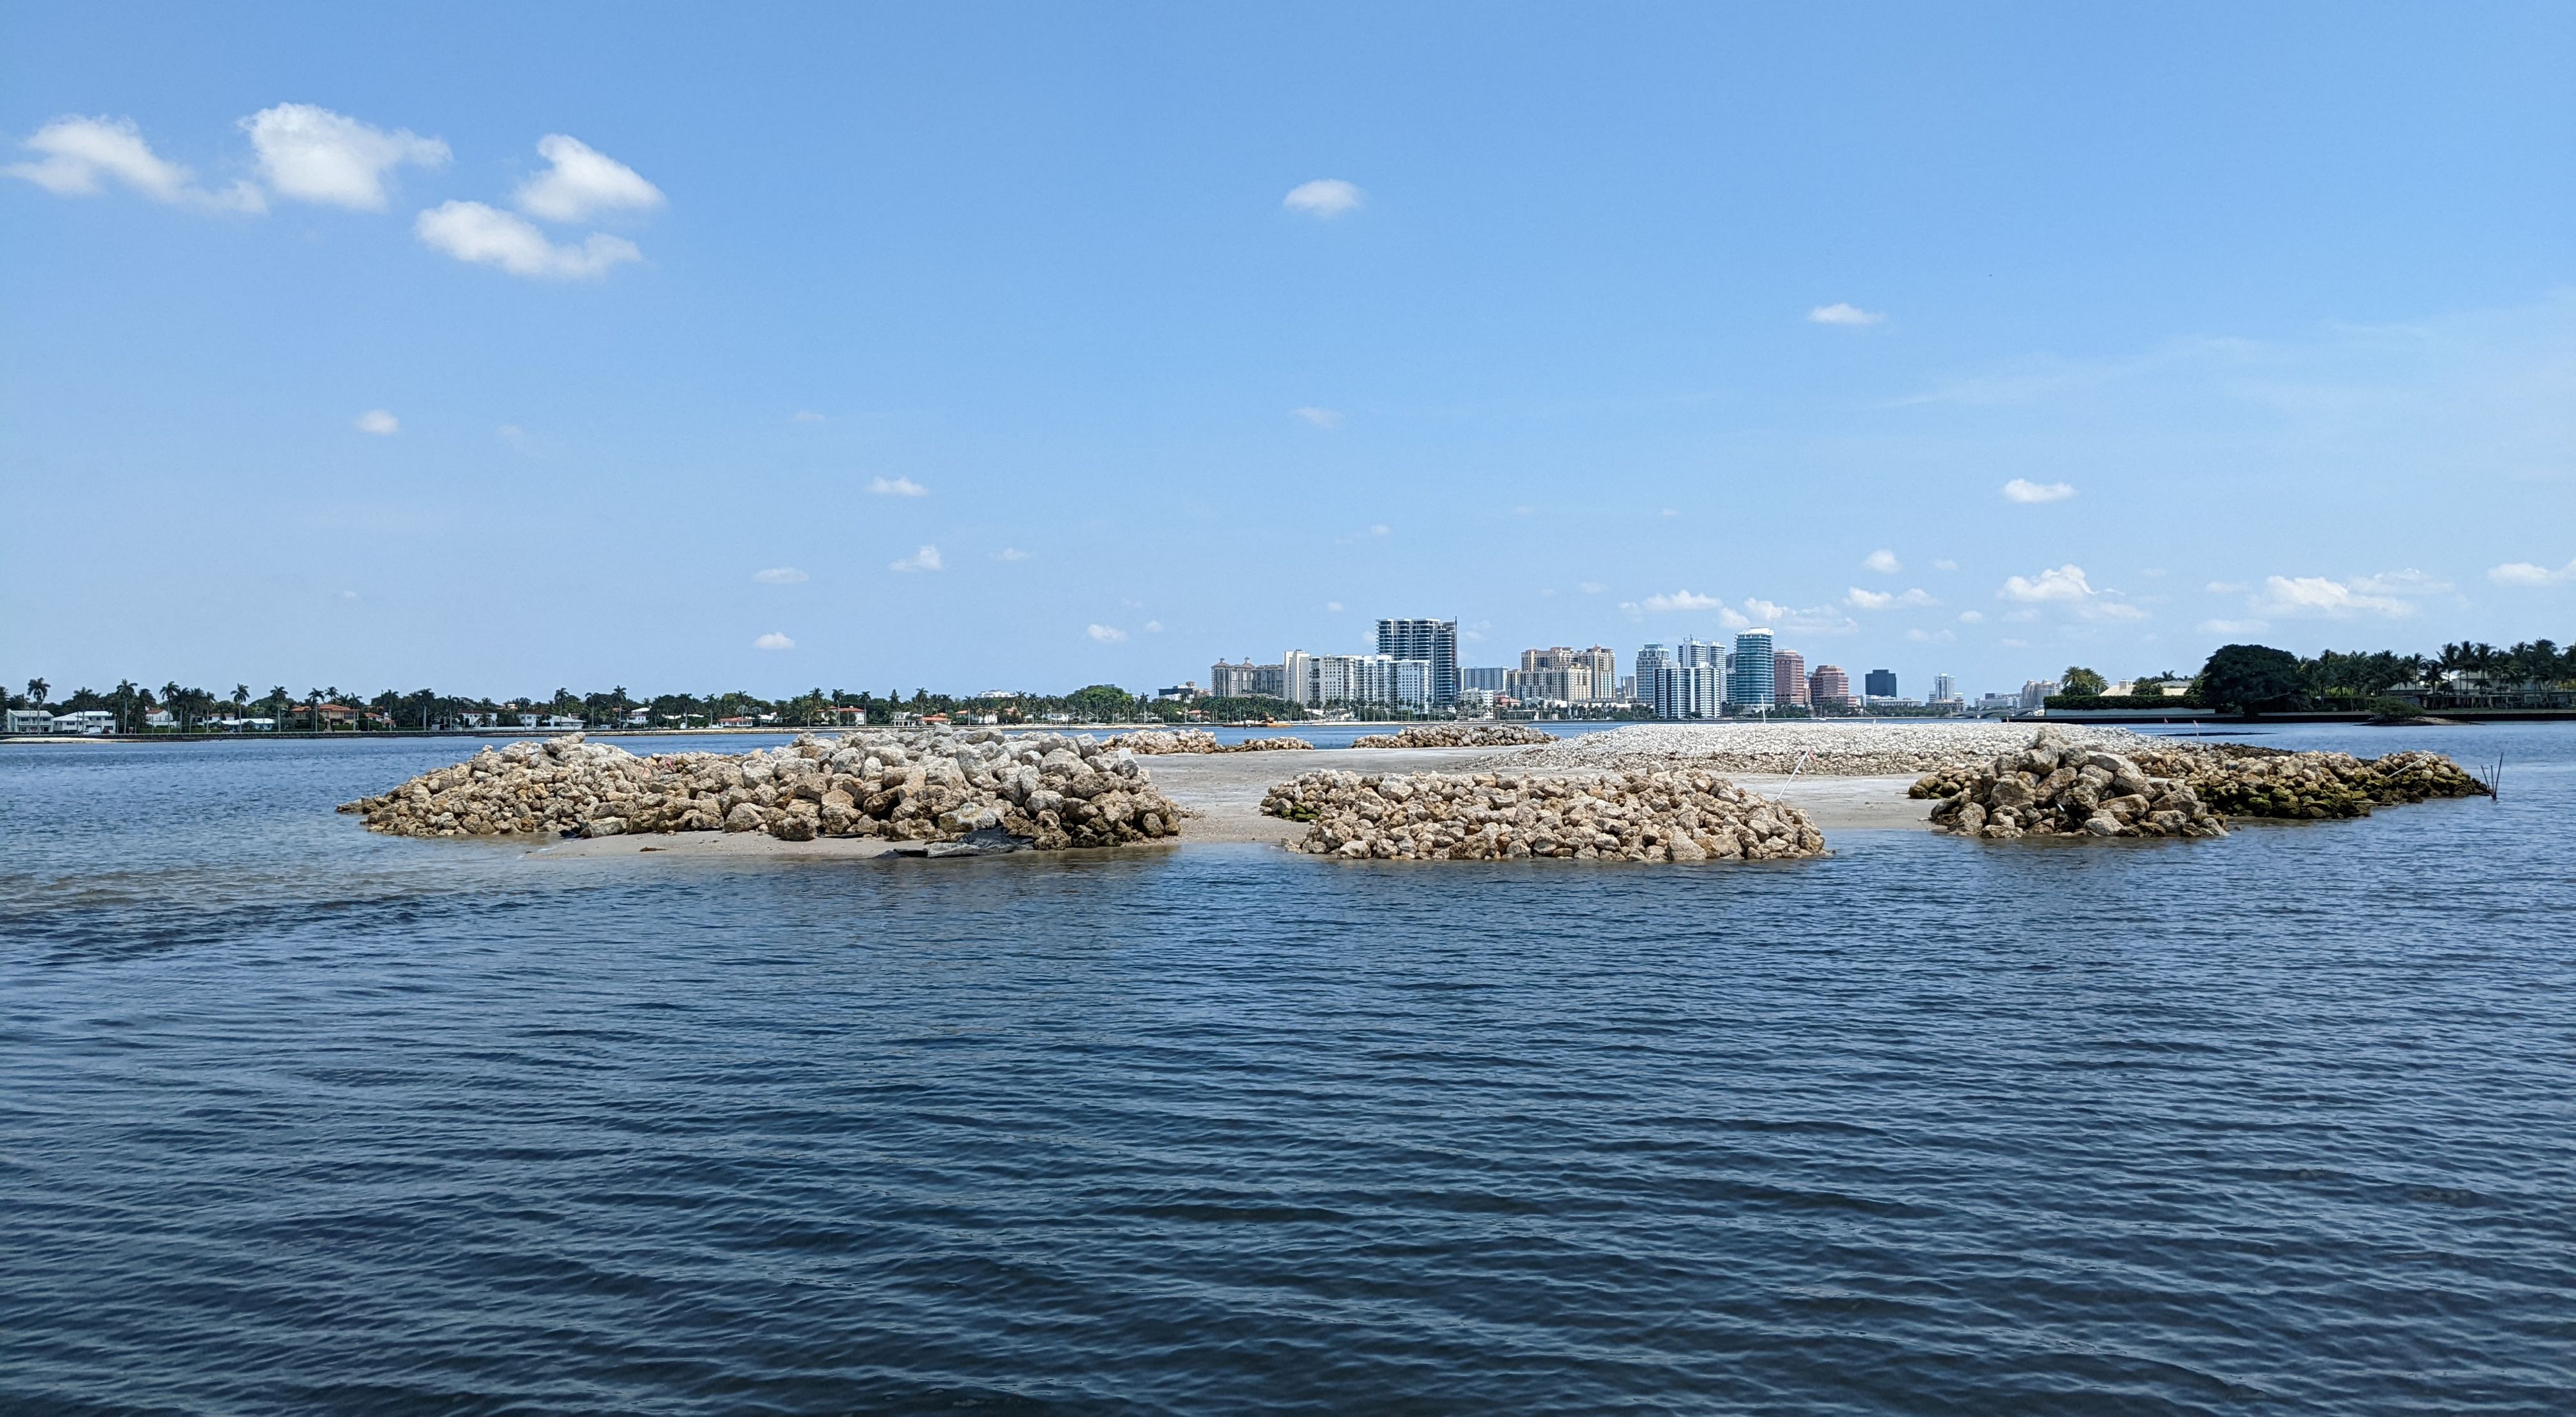 A view through Lake Worth Lagoon looking over the Palm Beach Resilient Island and to the skyline of West Palm Beach on the other side of the lagoon.